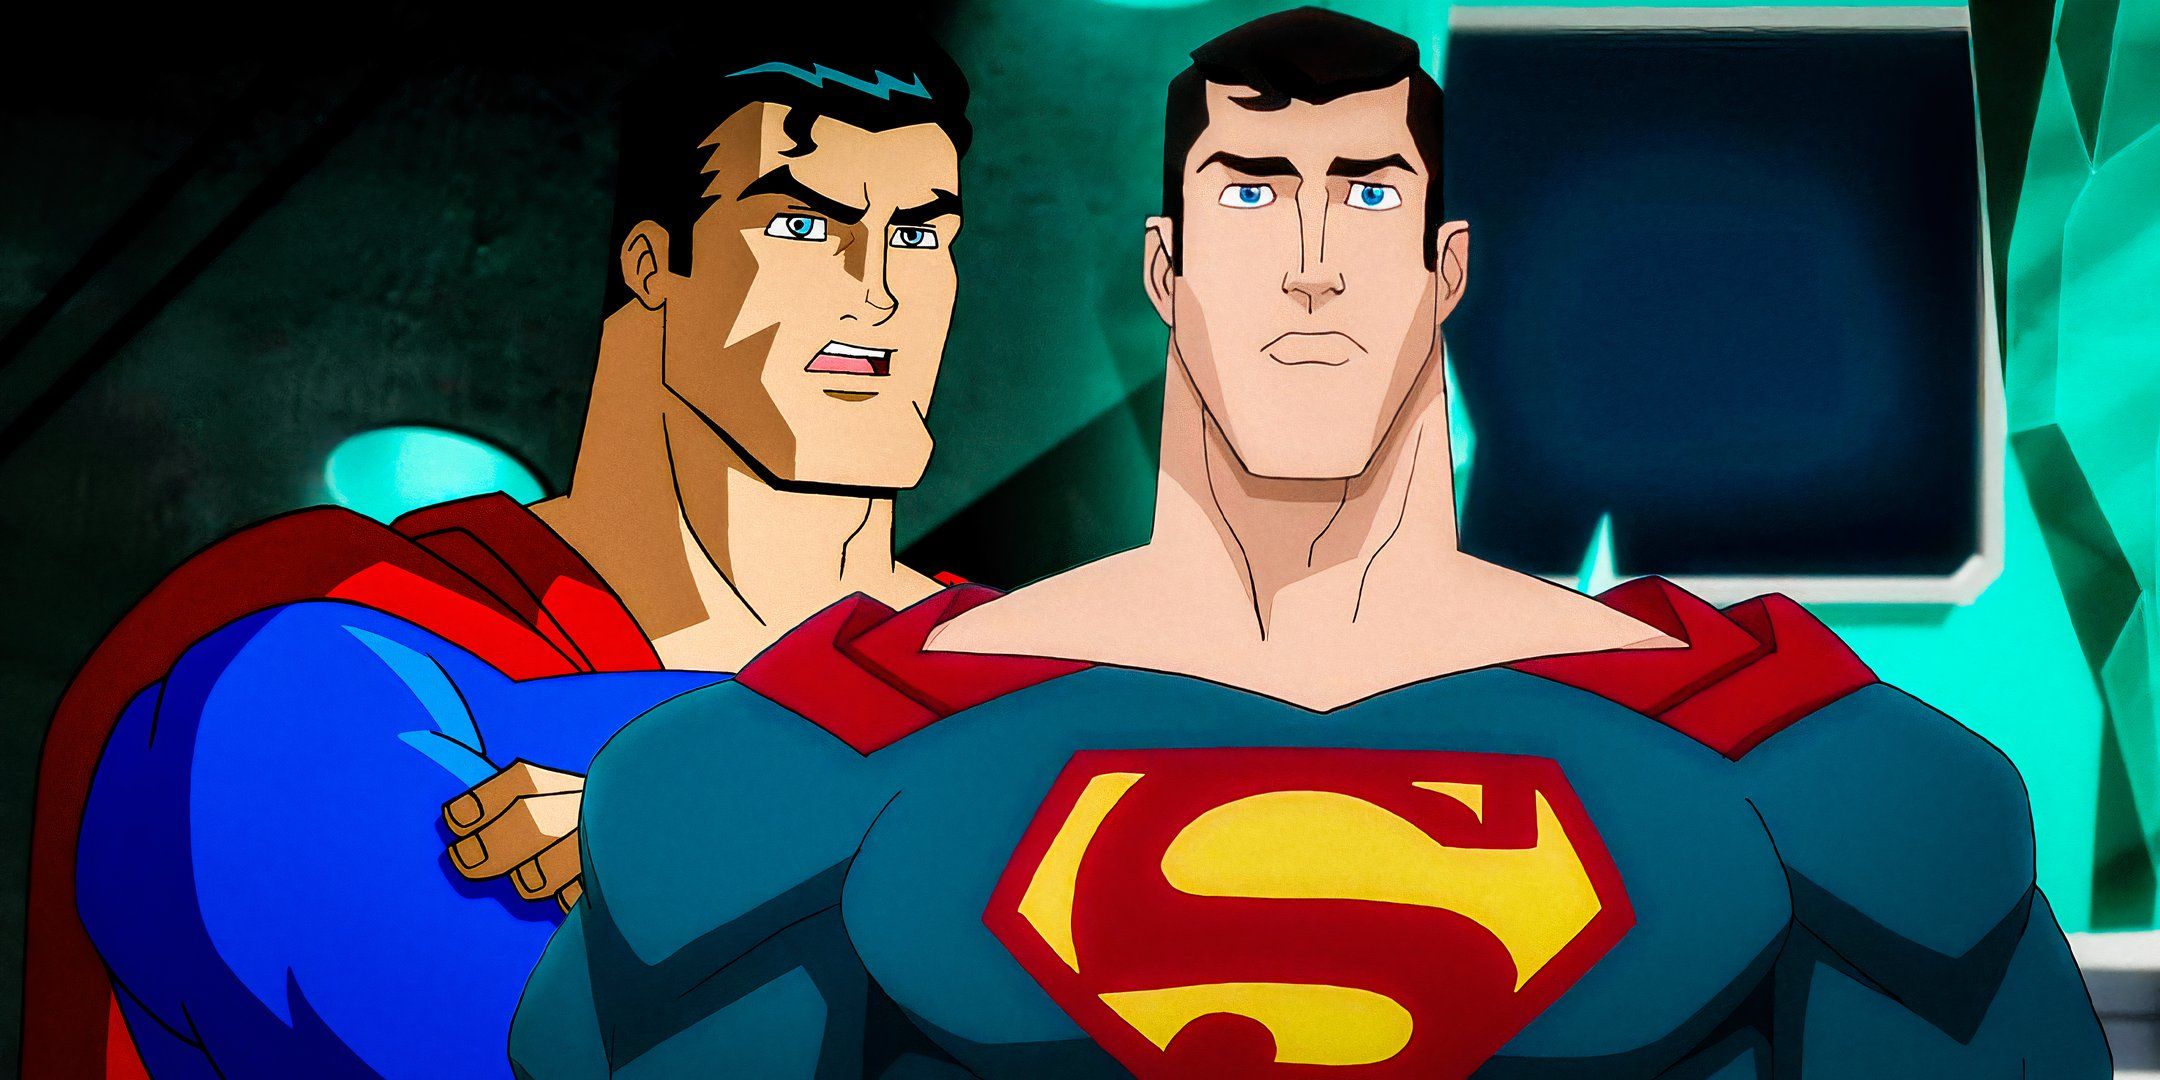 A split image of Superman from various DC animated movies